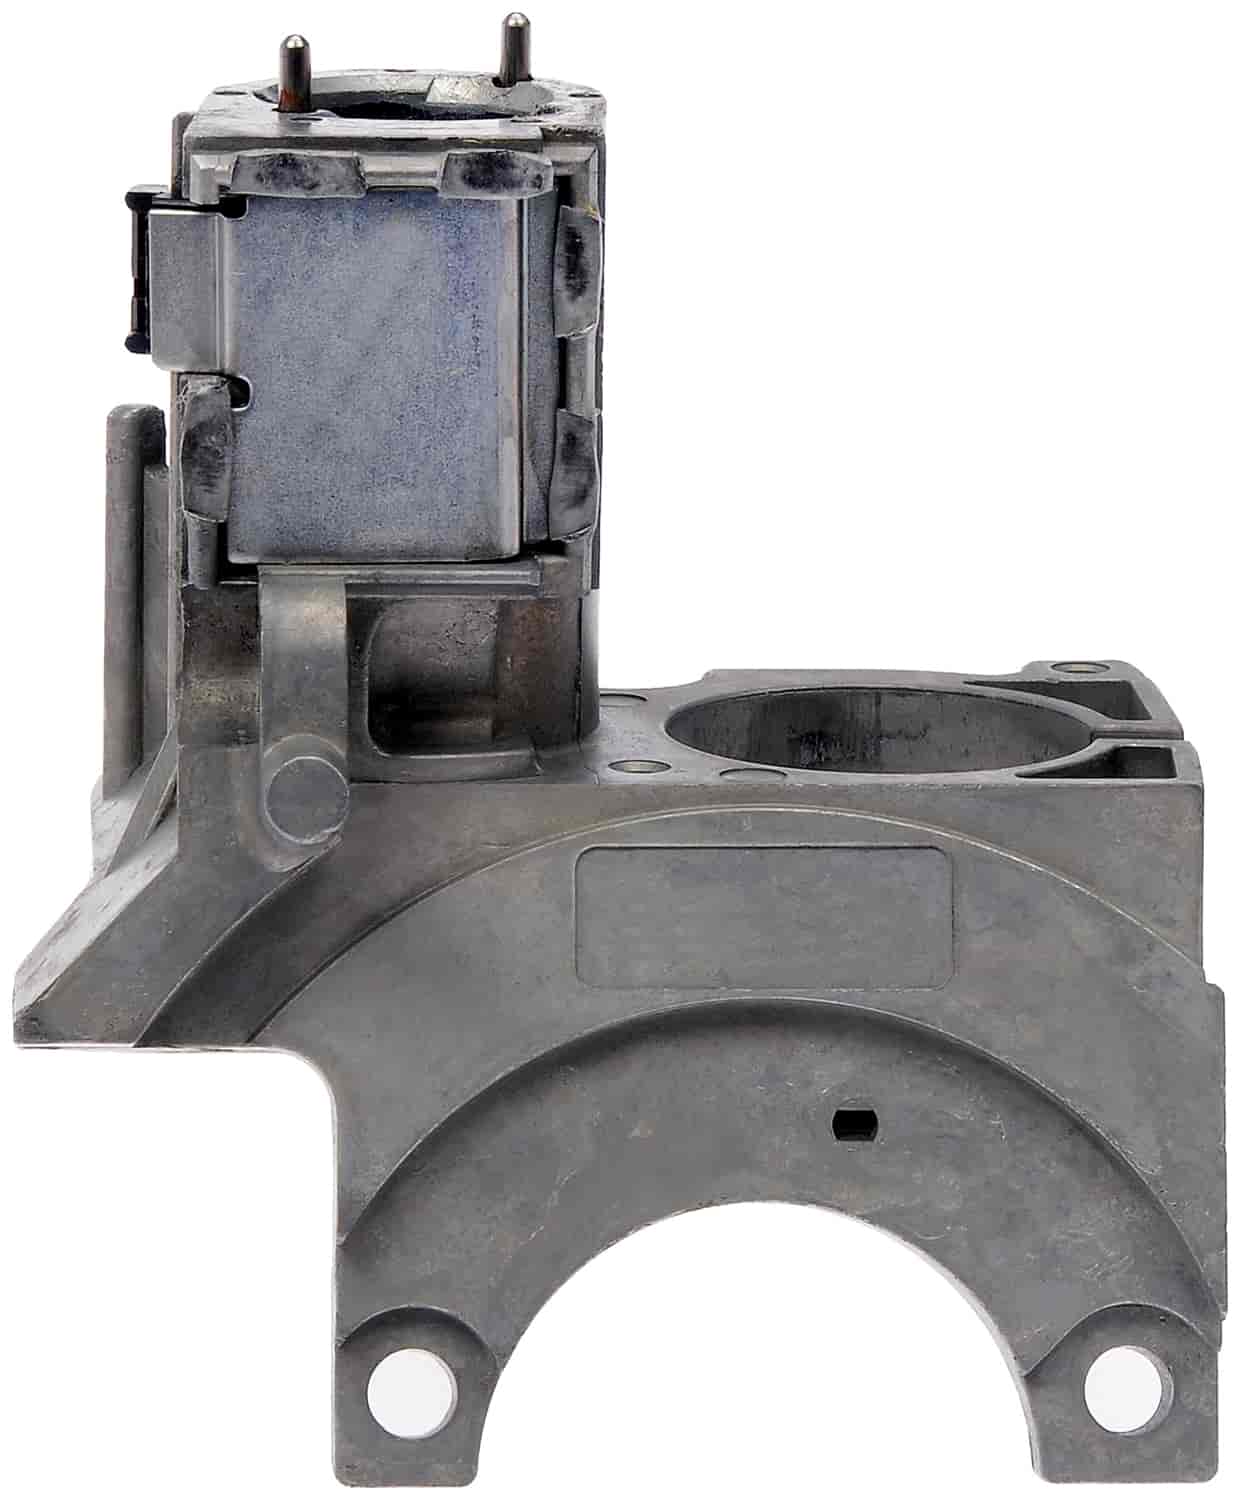 Dorman Products 924-720: Ignition Lock Housing with Passlock Sensor JEGS